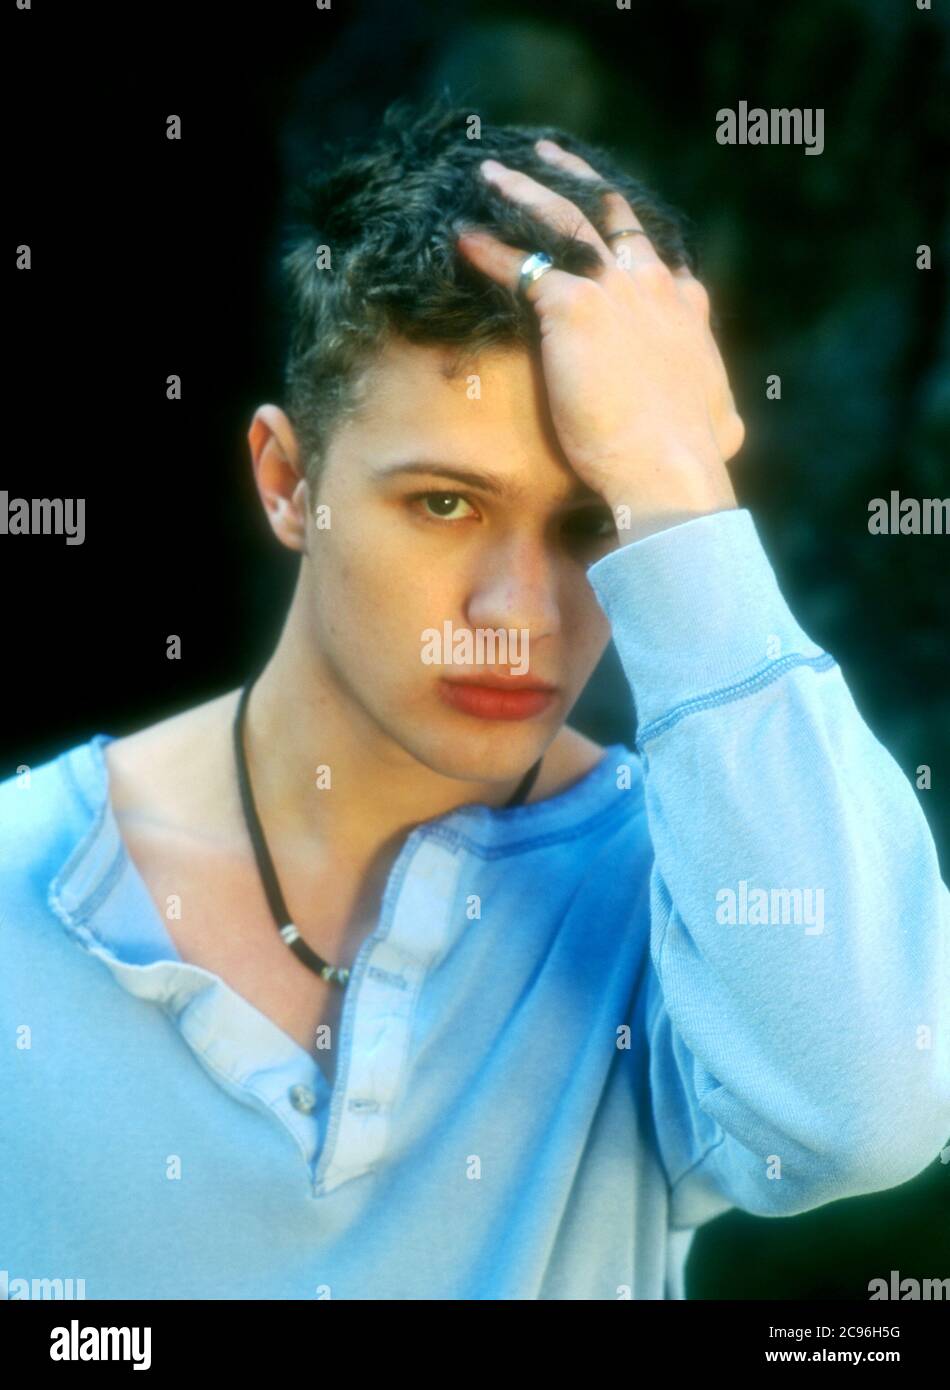 Los Angeles, California, USA 13th February 1996 (Exclusive) Actor Ryan Phillippe poses at a photo shoot on February 13, 1996 in Los Angeles, California, USA. Photo by Barry King/Alamy Stock Photo Stock Photo